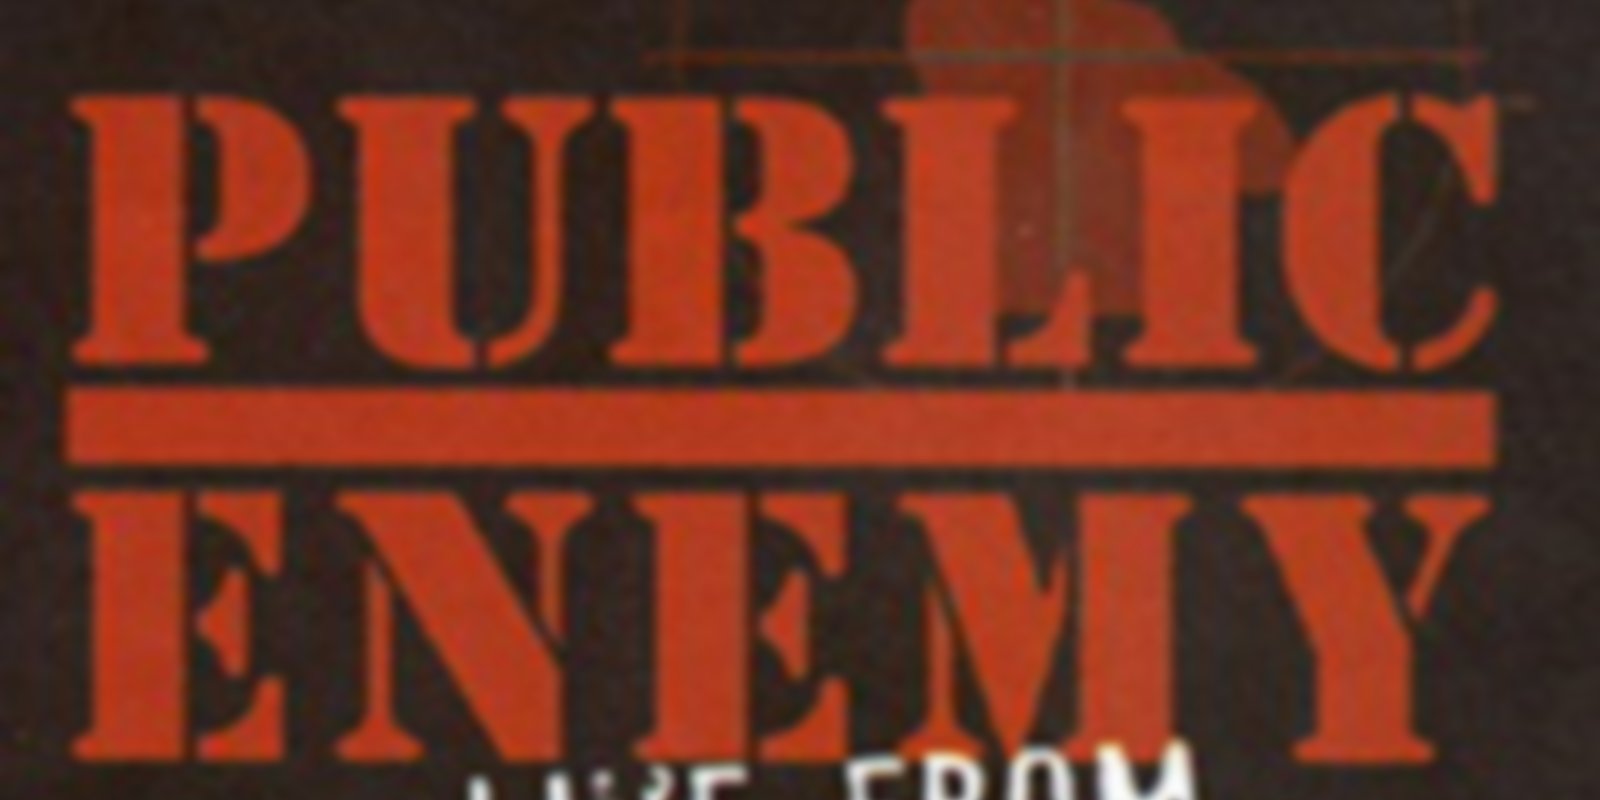 Public Enemy - Live from House of Blues